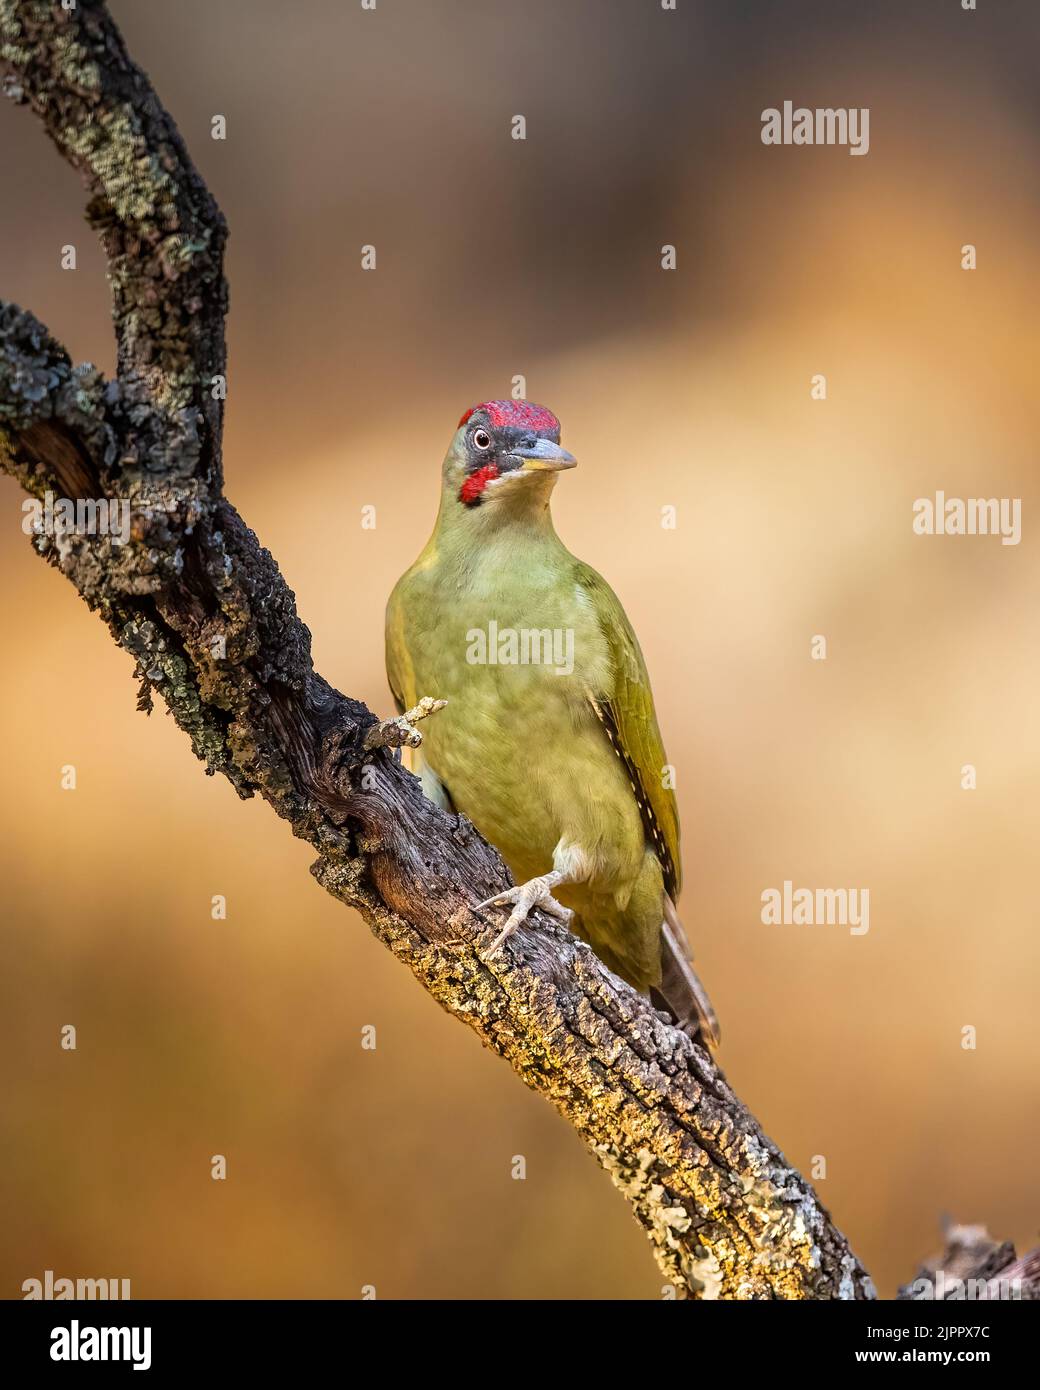 An Iberian Green Woodpecker (Picus sharpei) climbing a branch with a background of soft-focus grassland in golden light , Andalucia, Spain Stock Photo